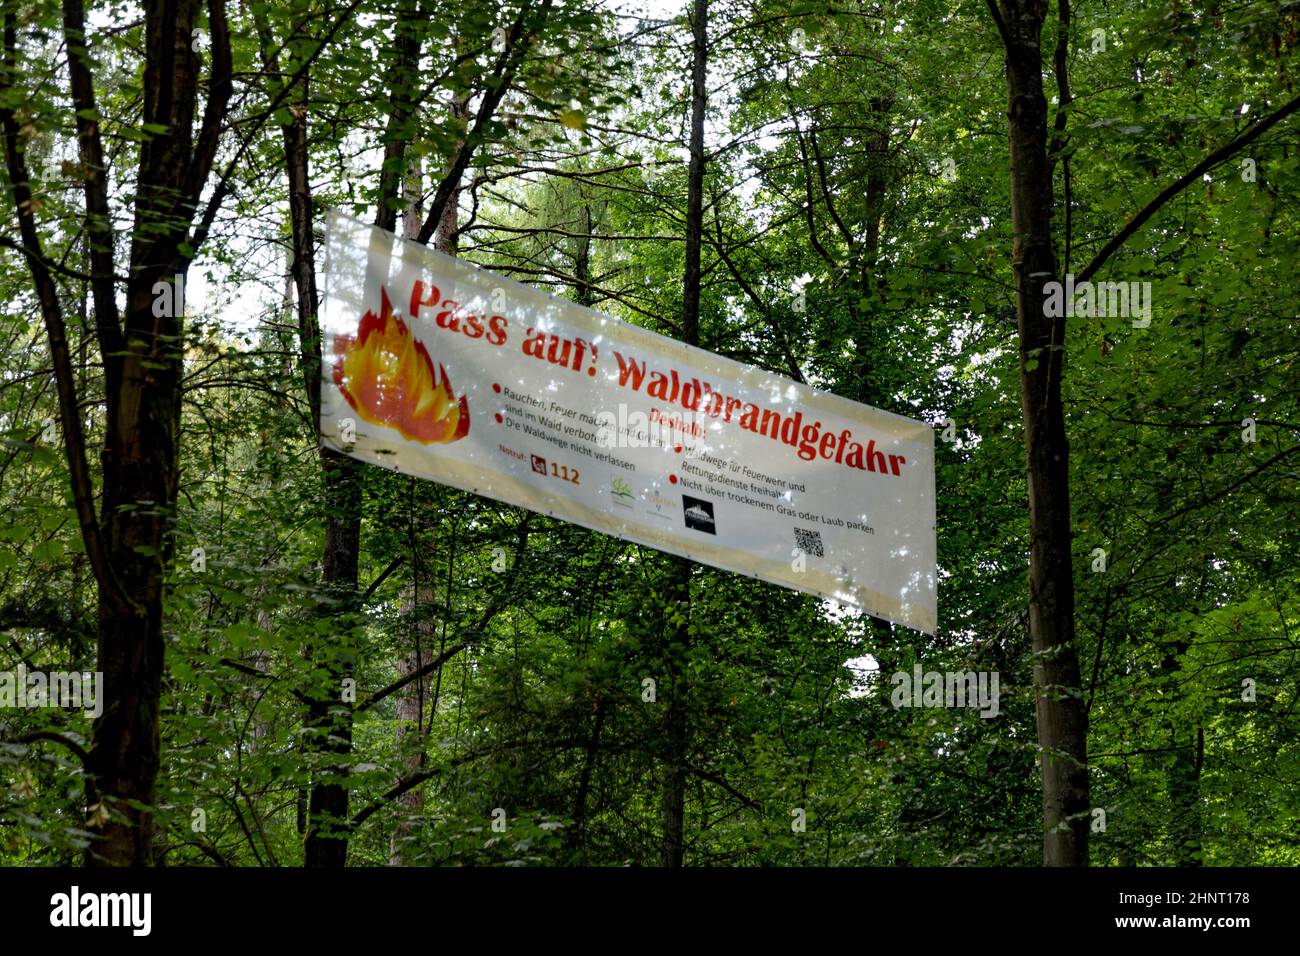 banner for warning of forest fire with advice to avoid open fire and contact information. Stock Photo